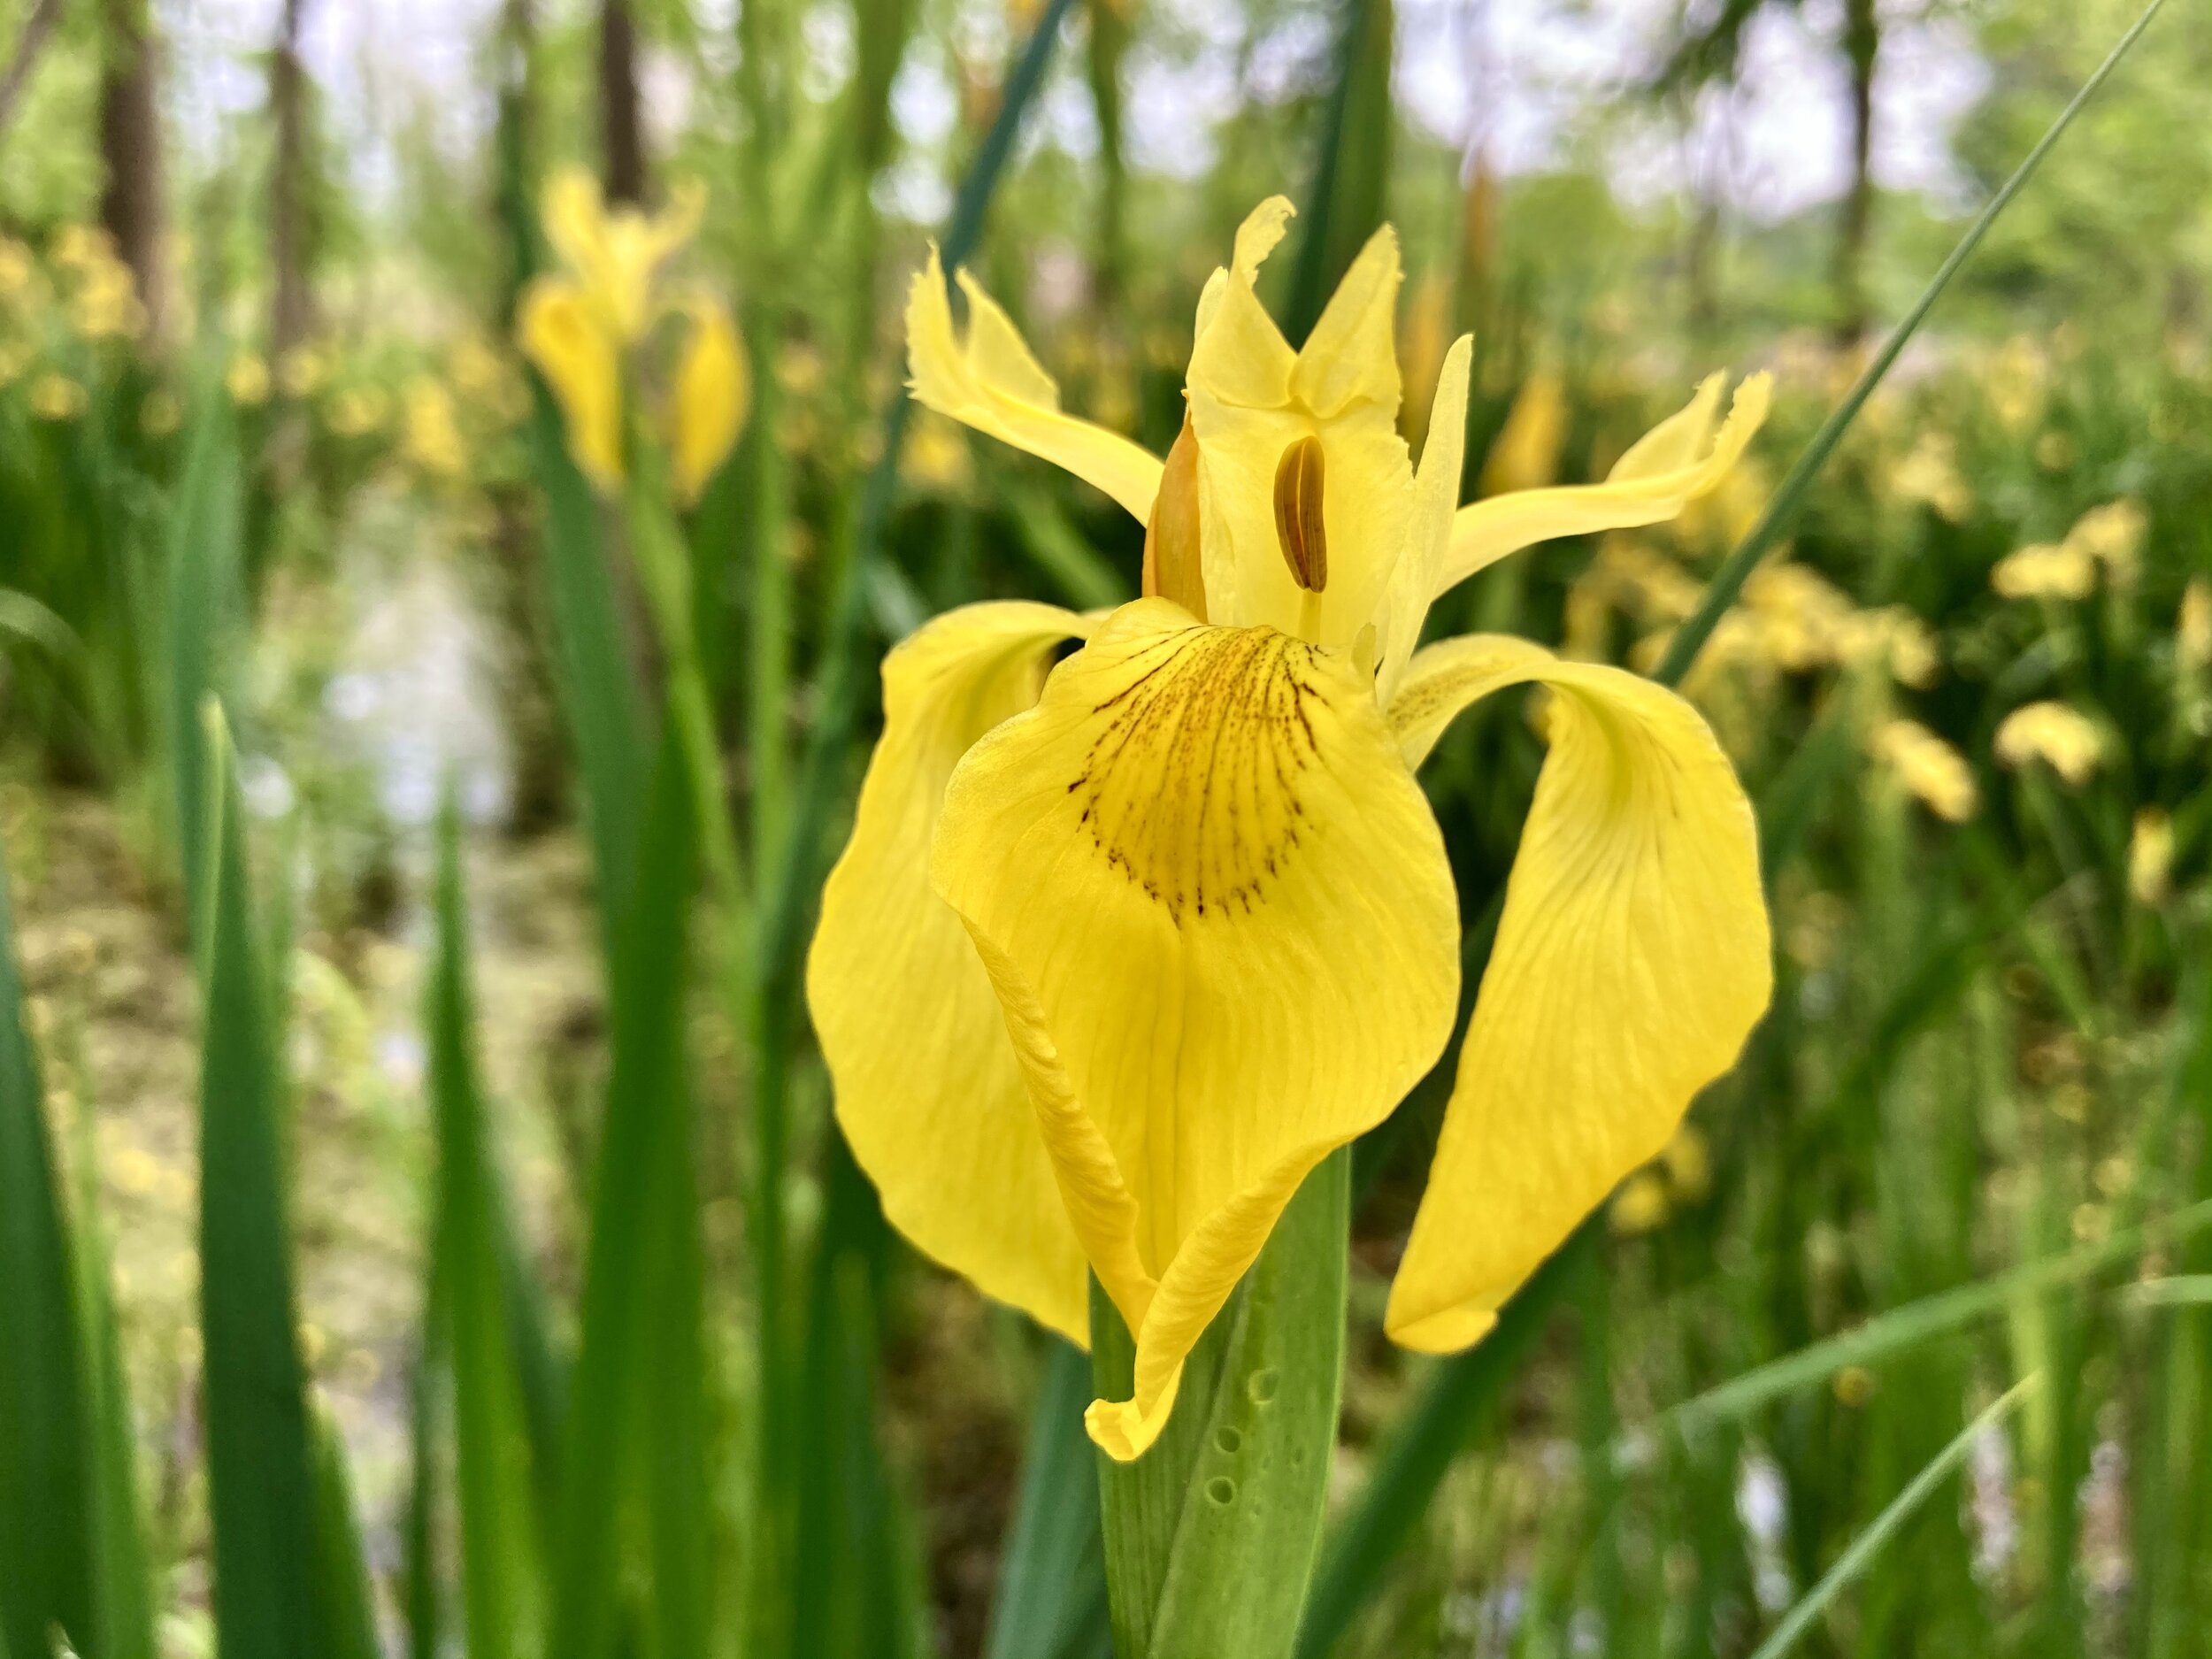 Bright yellow swamp iris with others out of focus behind